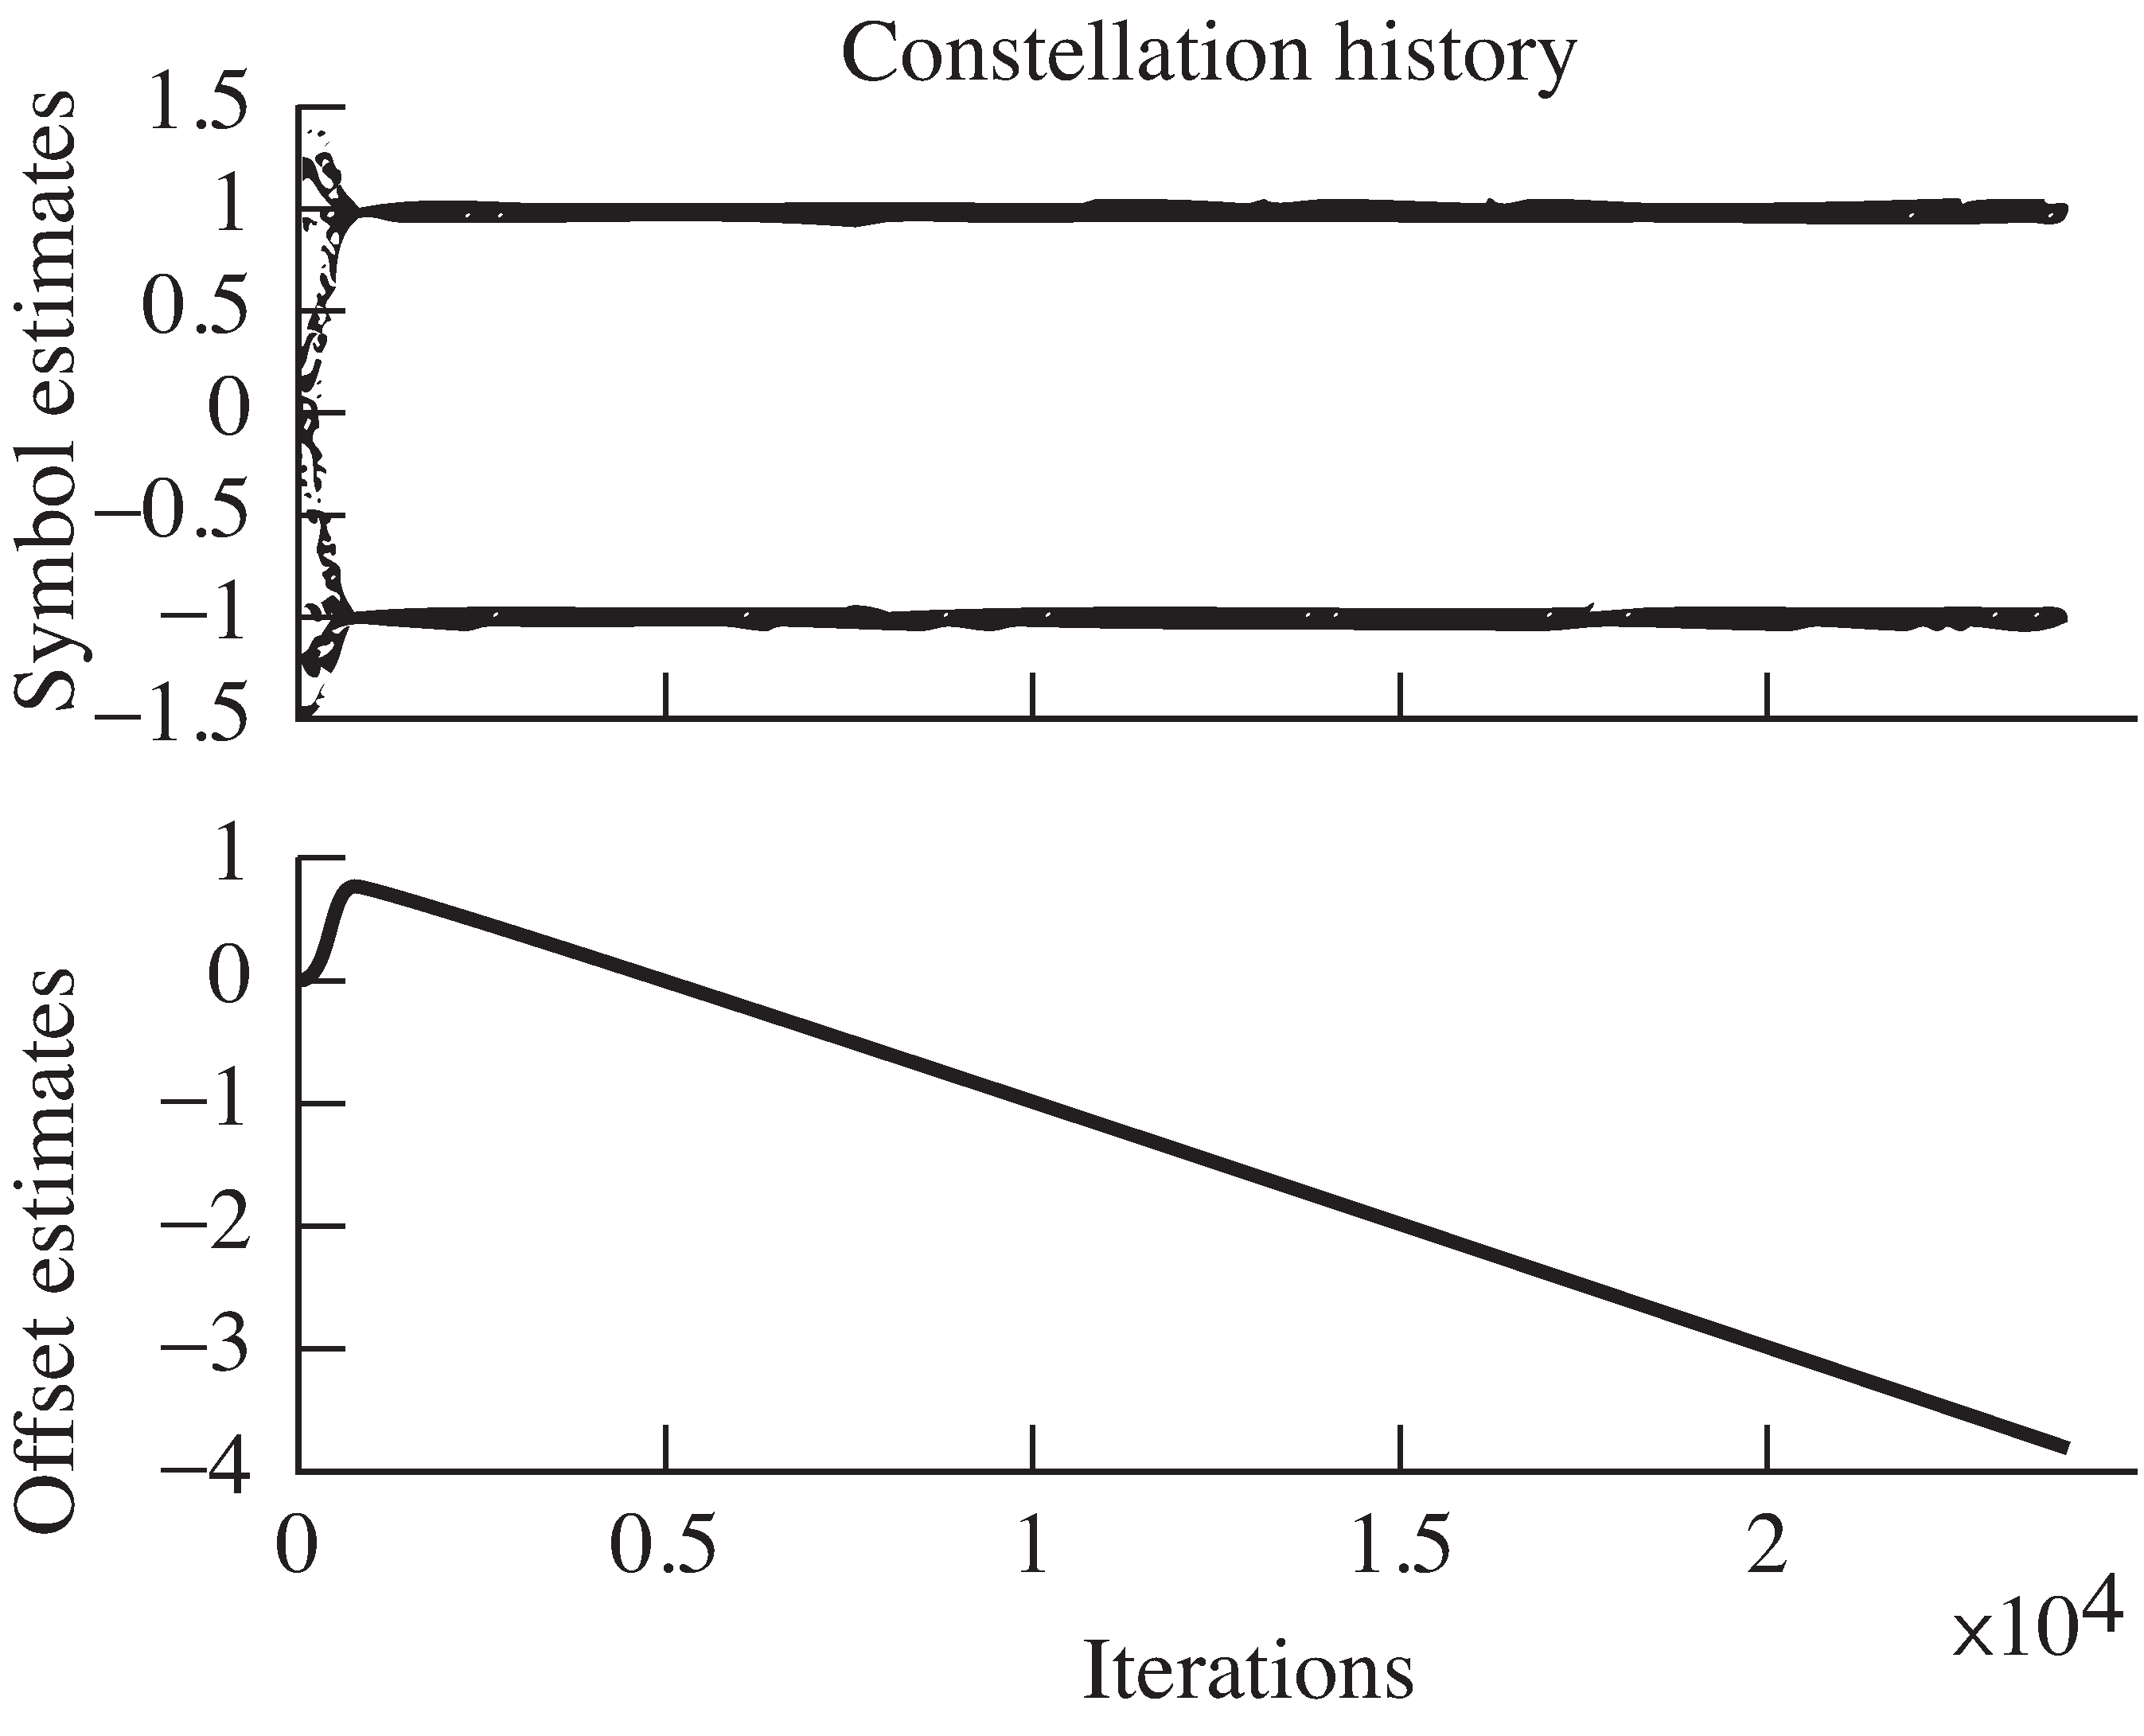 Output of clockrecperiod.m  as modified for Example 12-4 shows the constellation history in the top plot and the trajectory of the offset estimation in the bottom. The slope of the estimates is proportional to the difference between the nominal and the actual clock period.